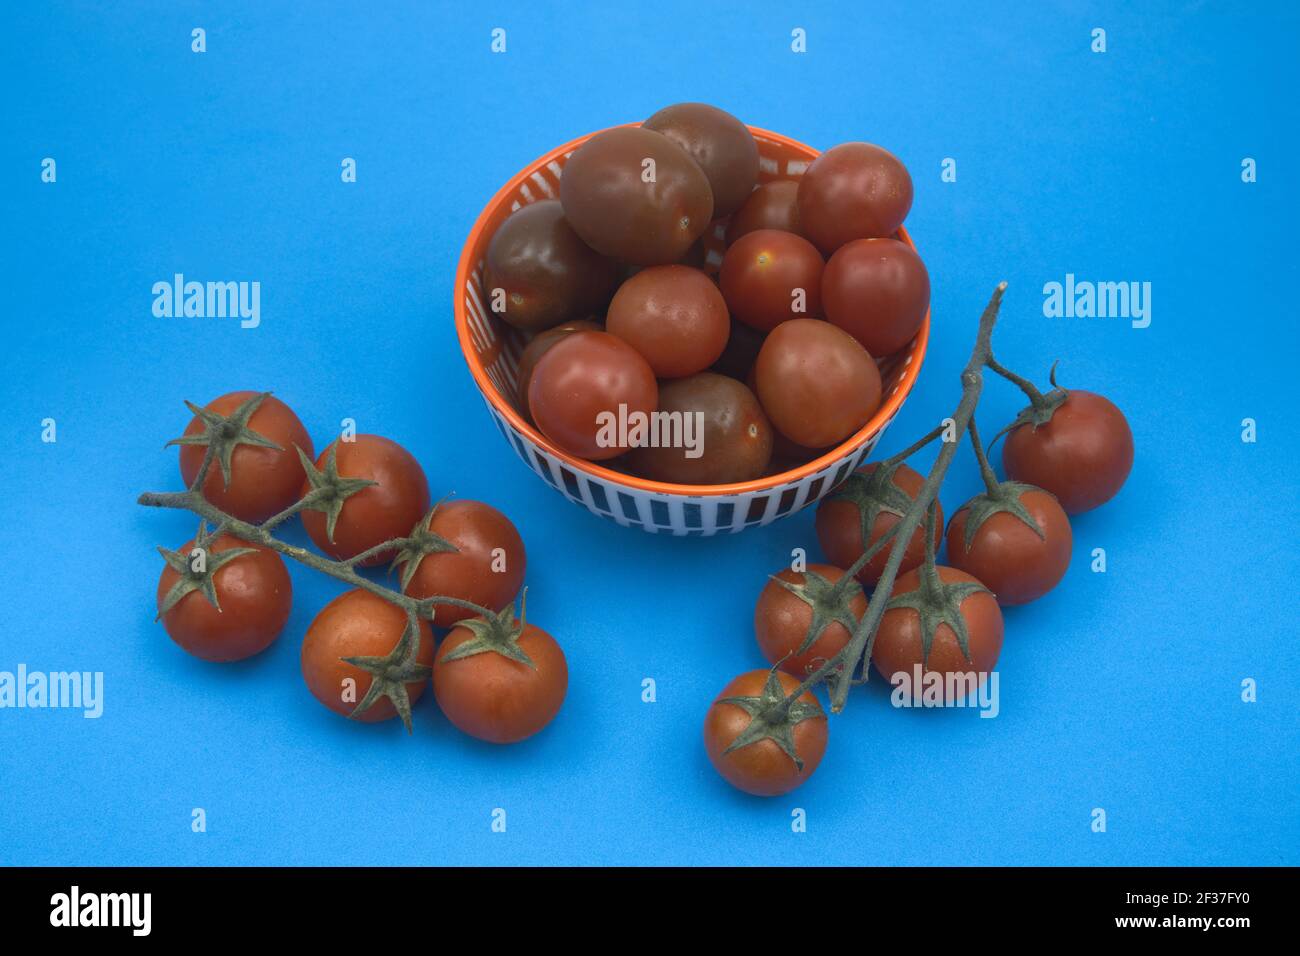 Still life of some cherry tomatoes of different varieties, on the branch, pear type, kumato, round on a neutral blue background Stock Photo